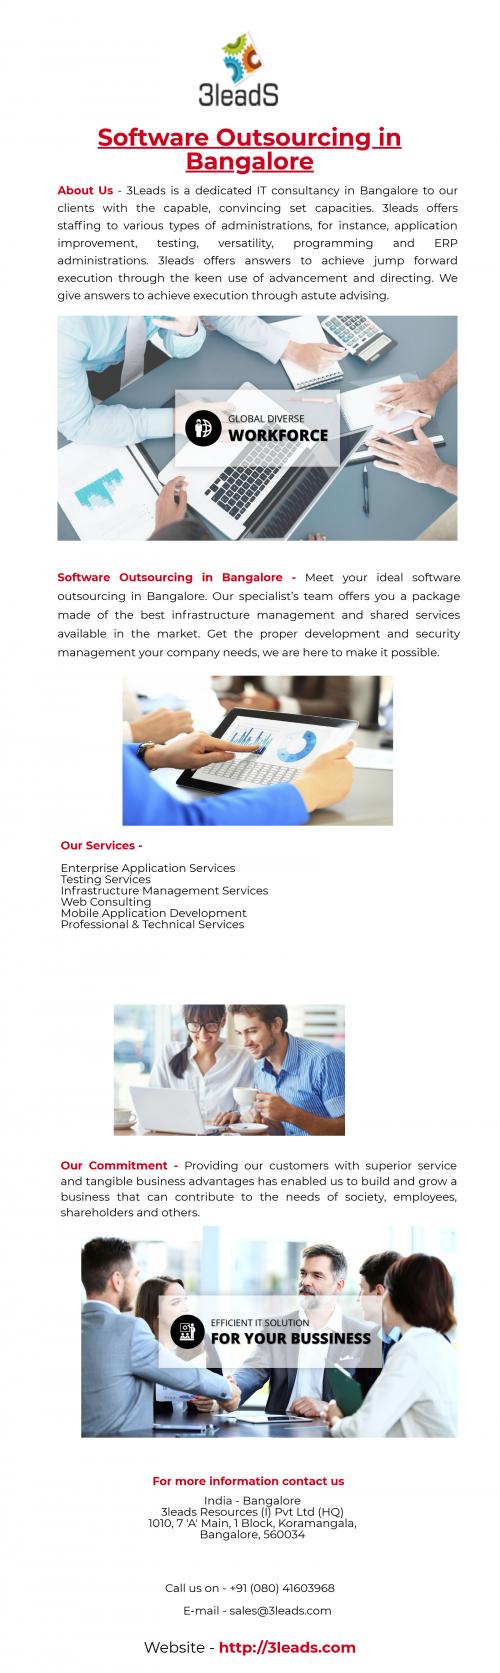 Software-Outsourcing-in-Bangalore.png